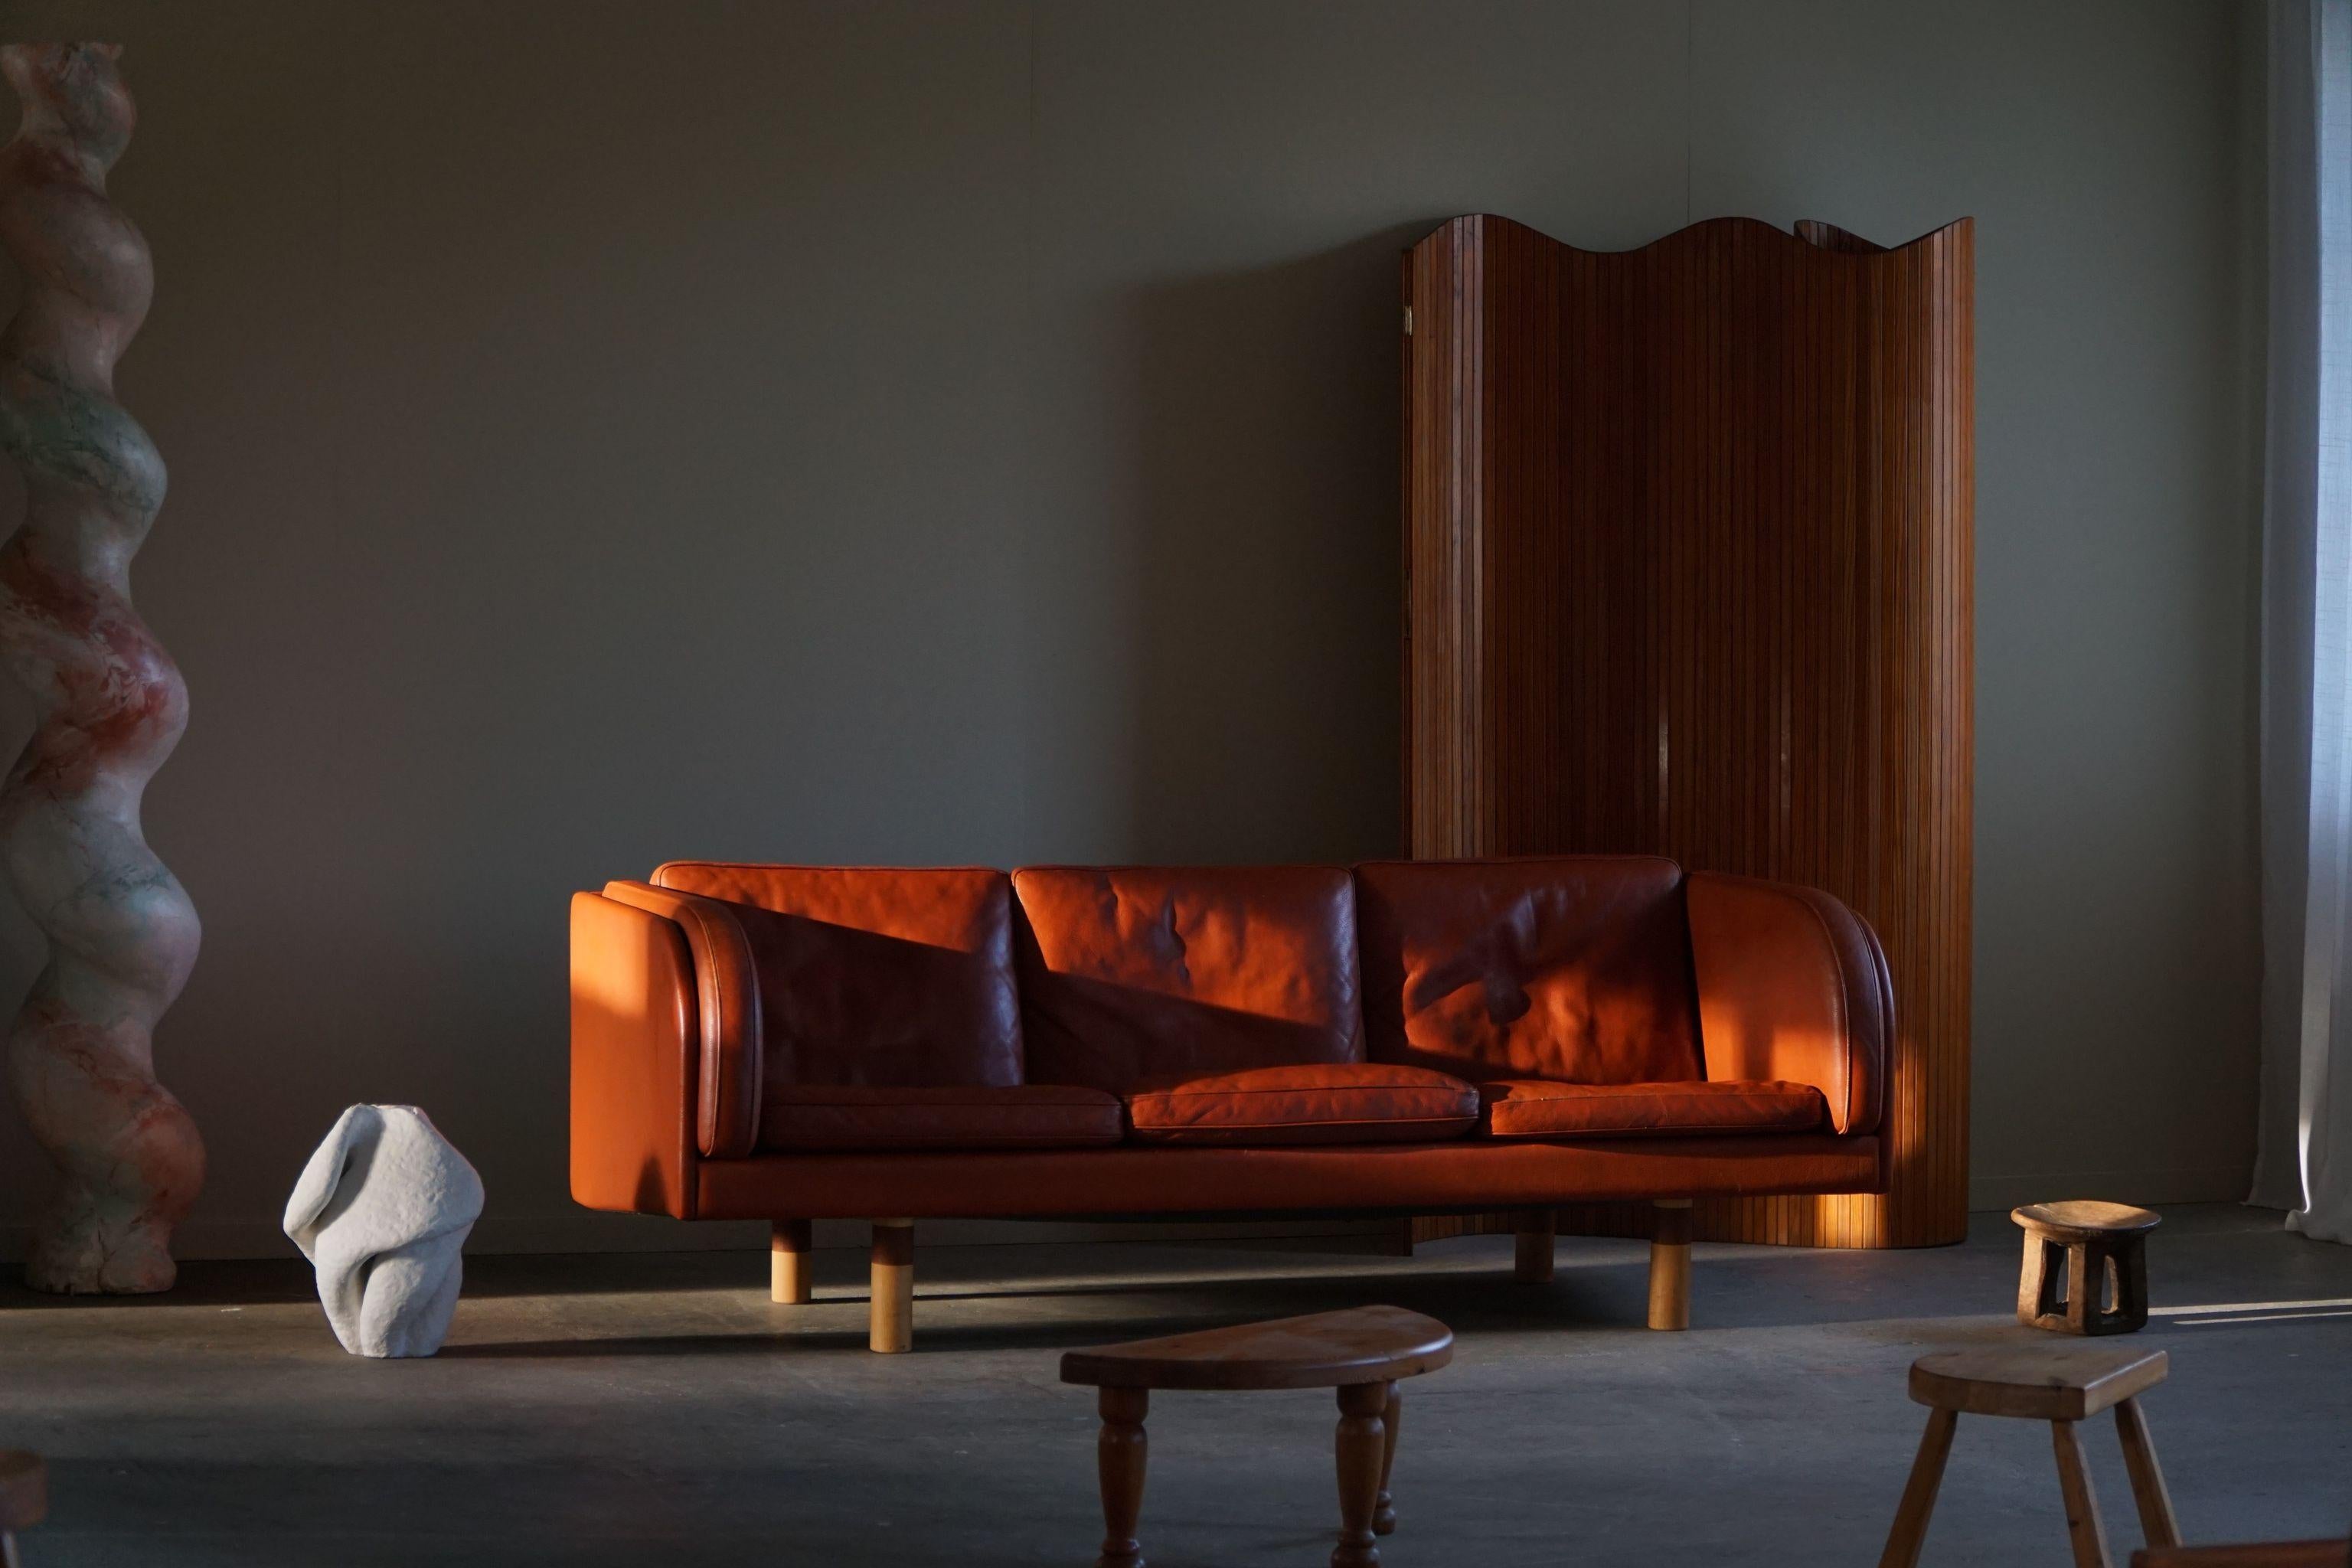 This charming 3-seater Sofa, Model EJ-20-3, designed by Jørgen Gammelgaard for Erik Jørgensen in the 1970s, embodies the essence of Danish Mid Century Modern design. Upholstered in vibrant red leather, the sofa exudes a timeless and elegant